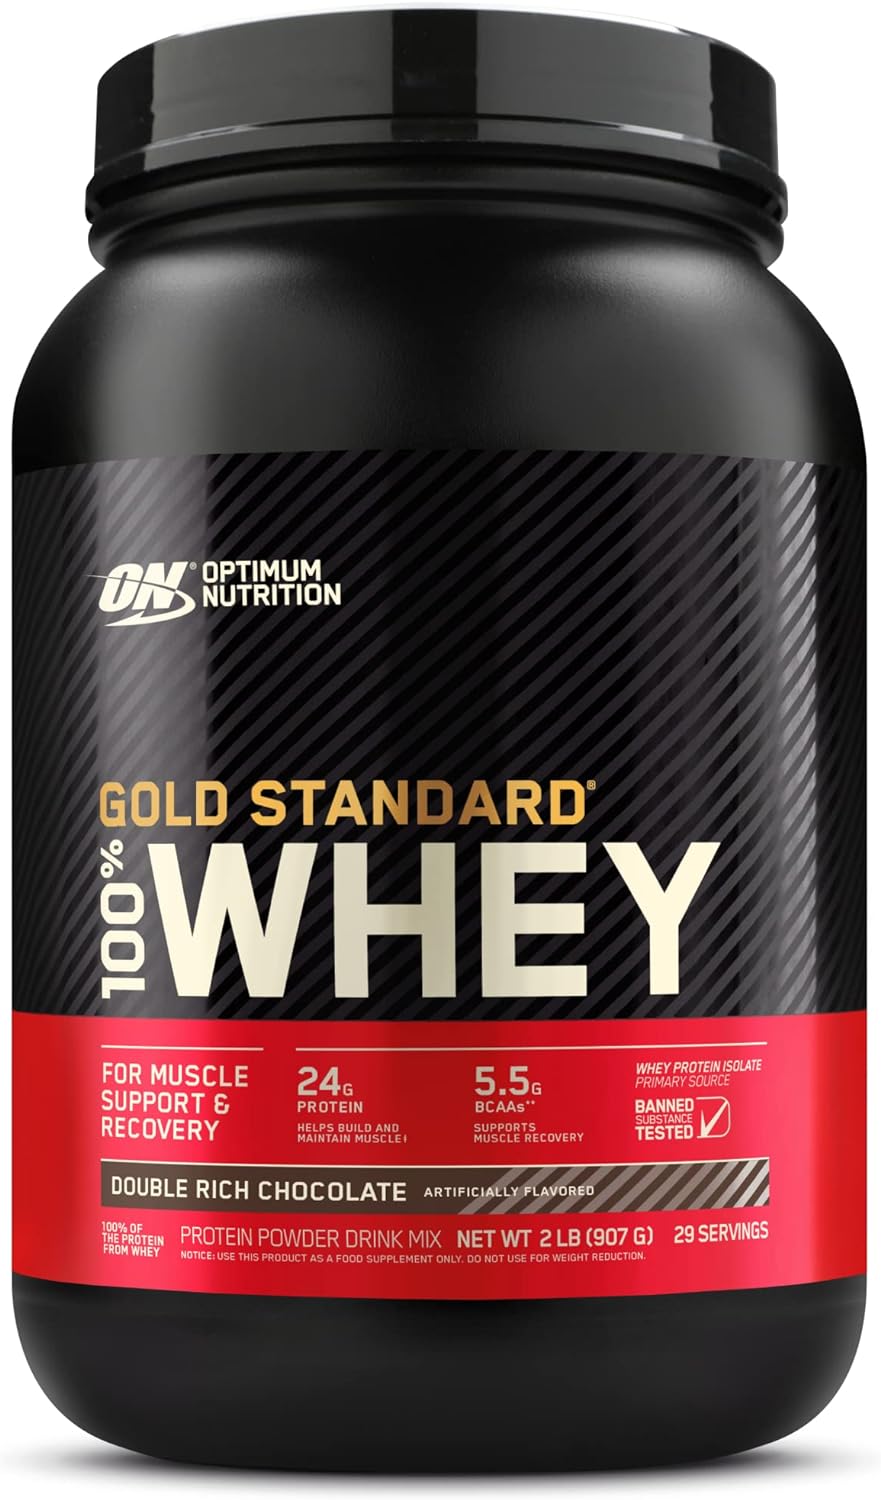 Optimum Nutrition (On) Gold Standard 100% Primary Source Whey Isolate Powder, Chocolate, 2 Lbs